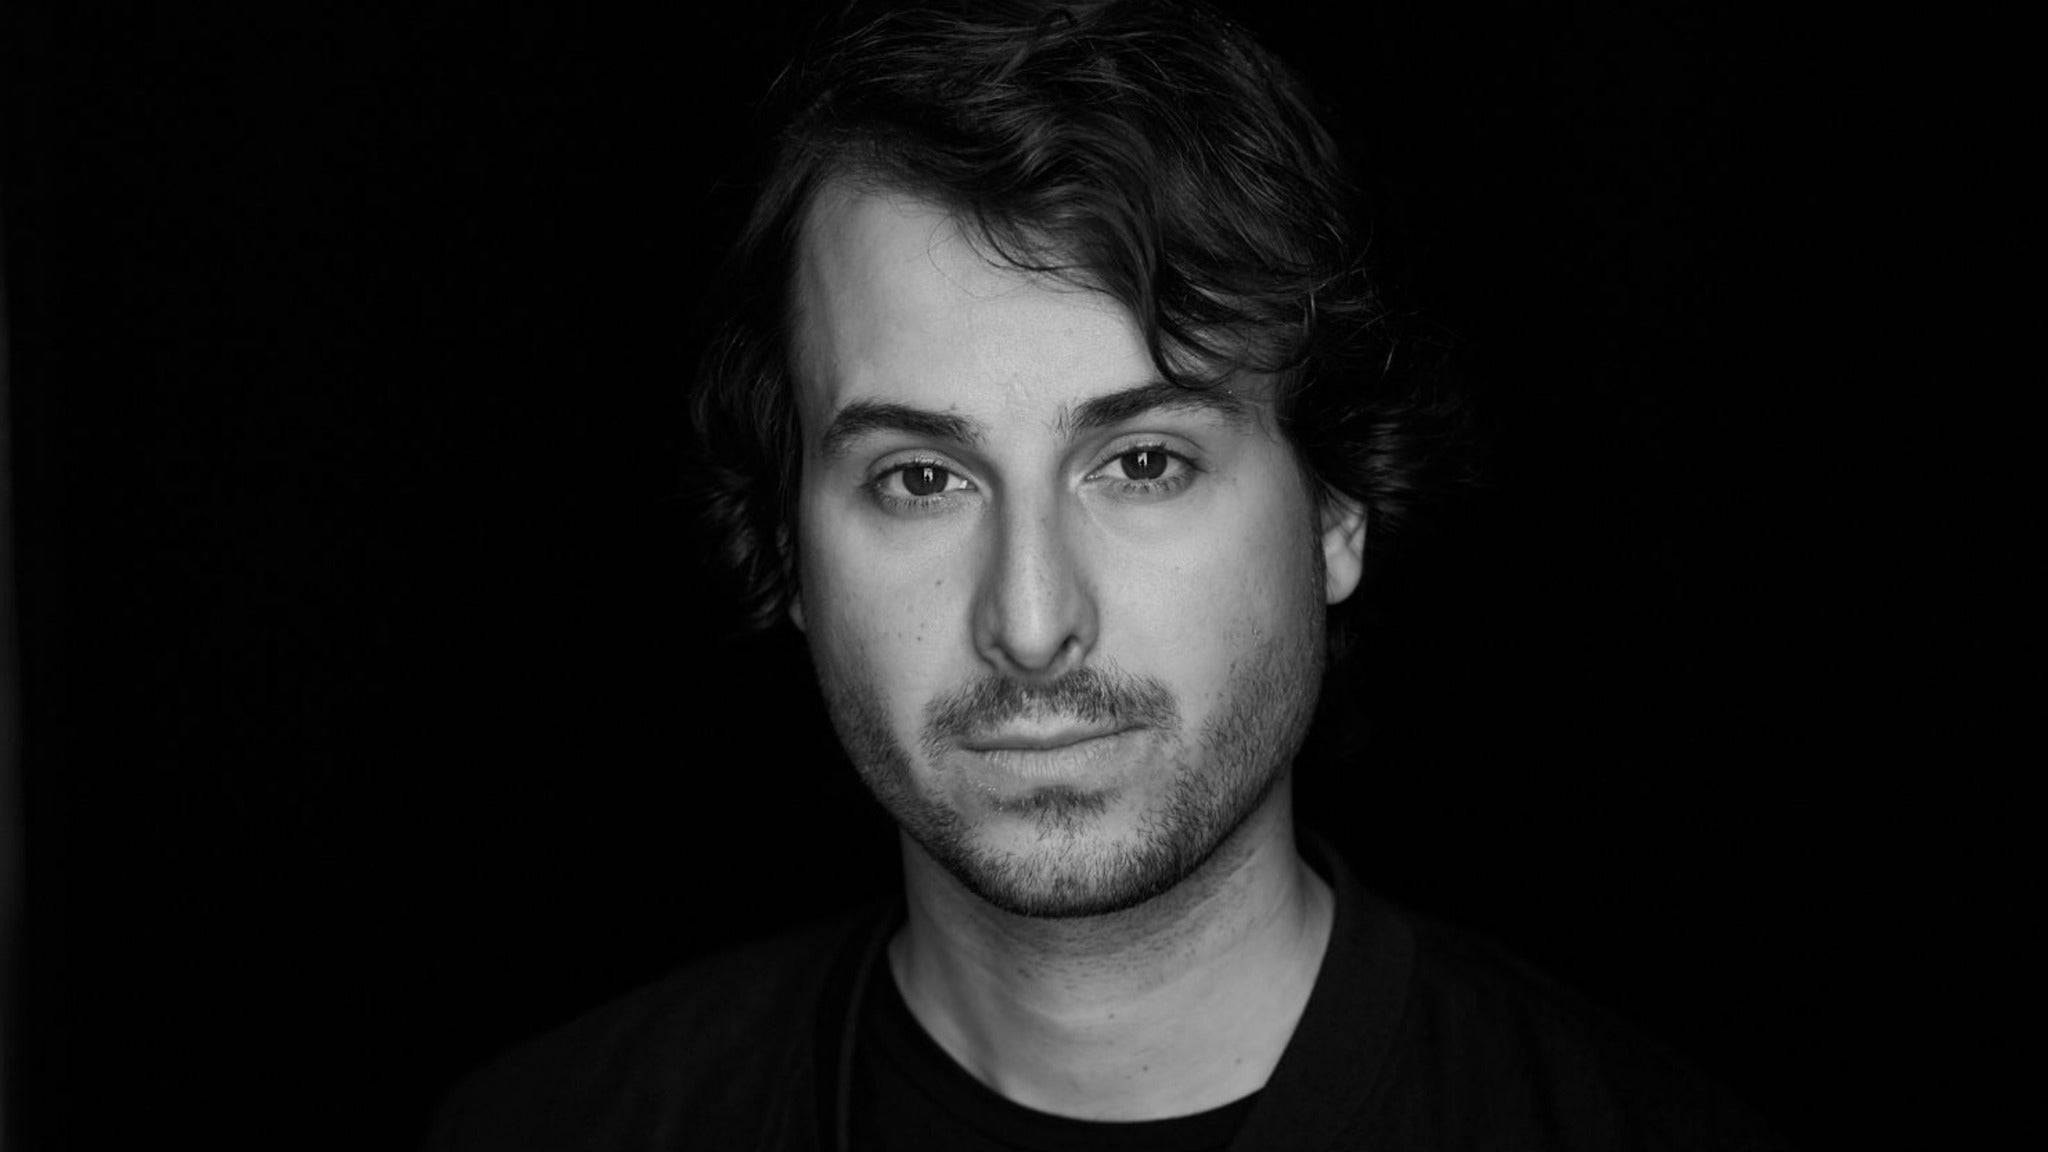 Bobby Bazini (Moved to The Great Hall) in Toronto promo photo for Live Nation Mobile App presale offer code